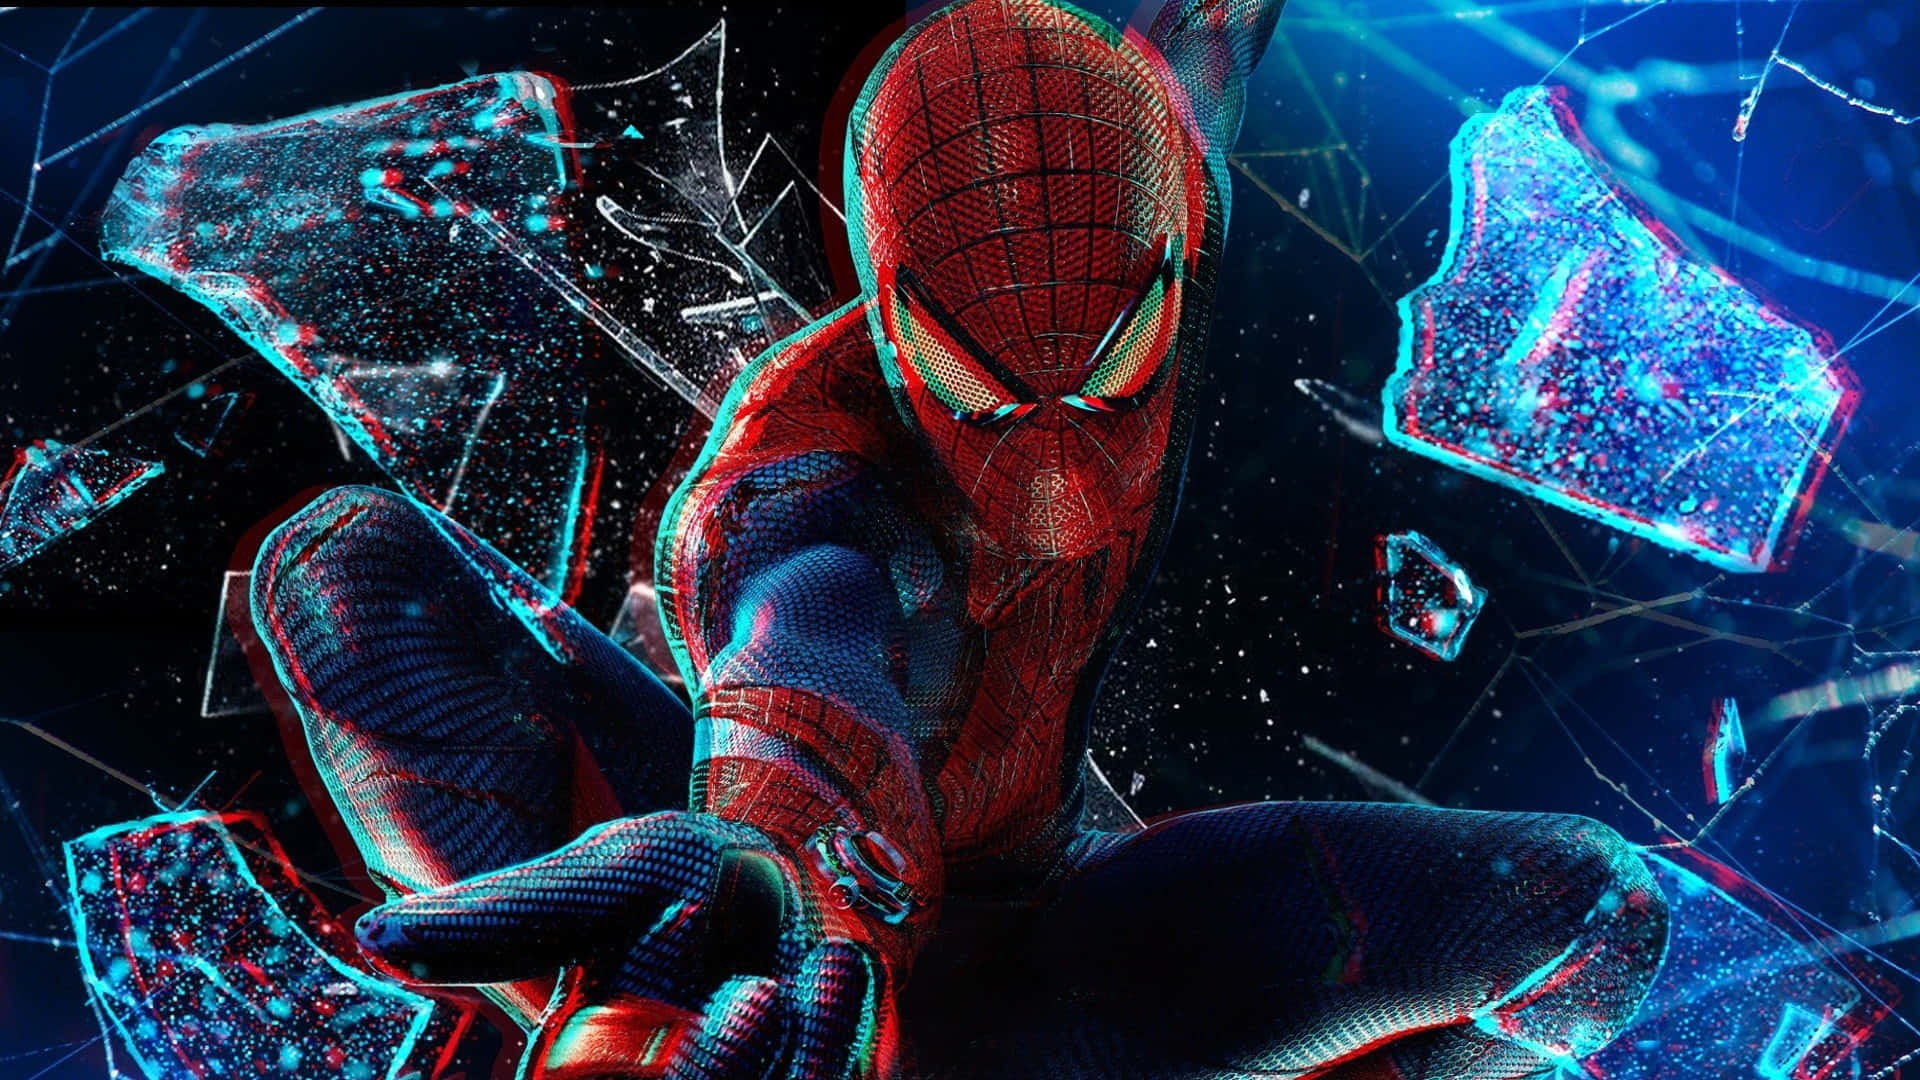 "Let me web sling you to coolness!" Wallpaper